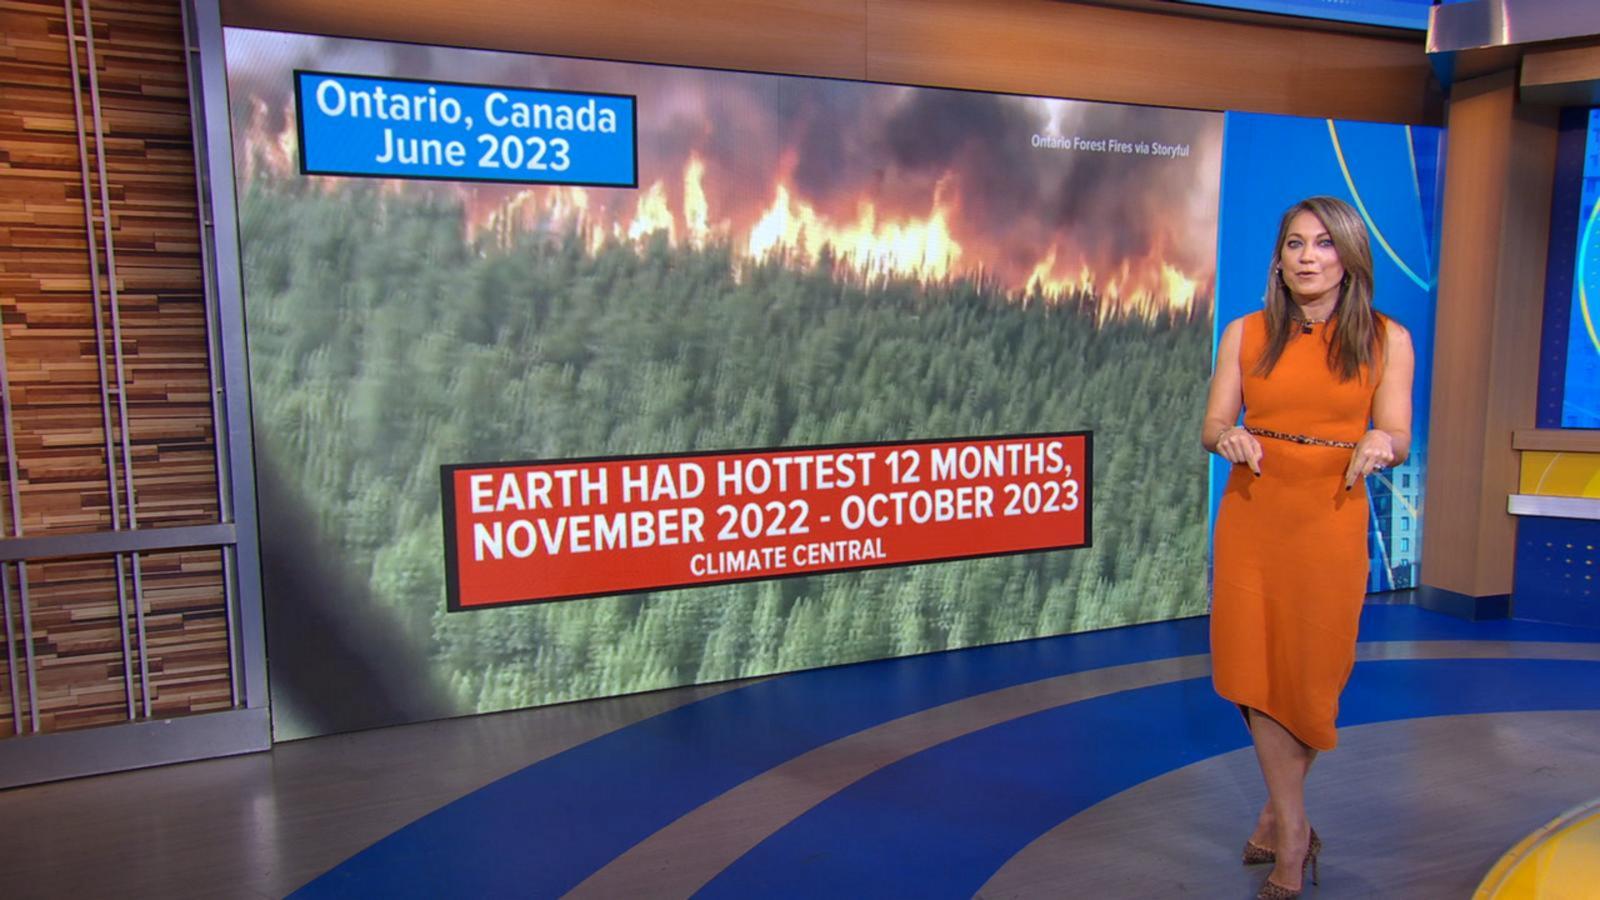 VIDEO: 2023 likely the hottest year on record